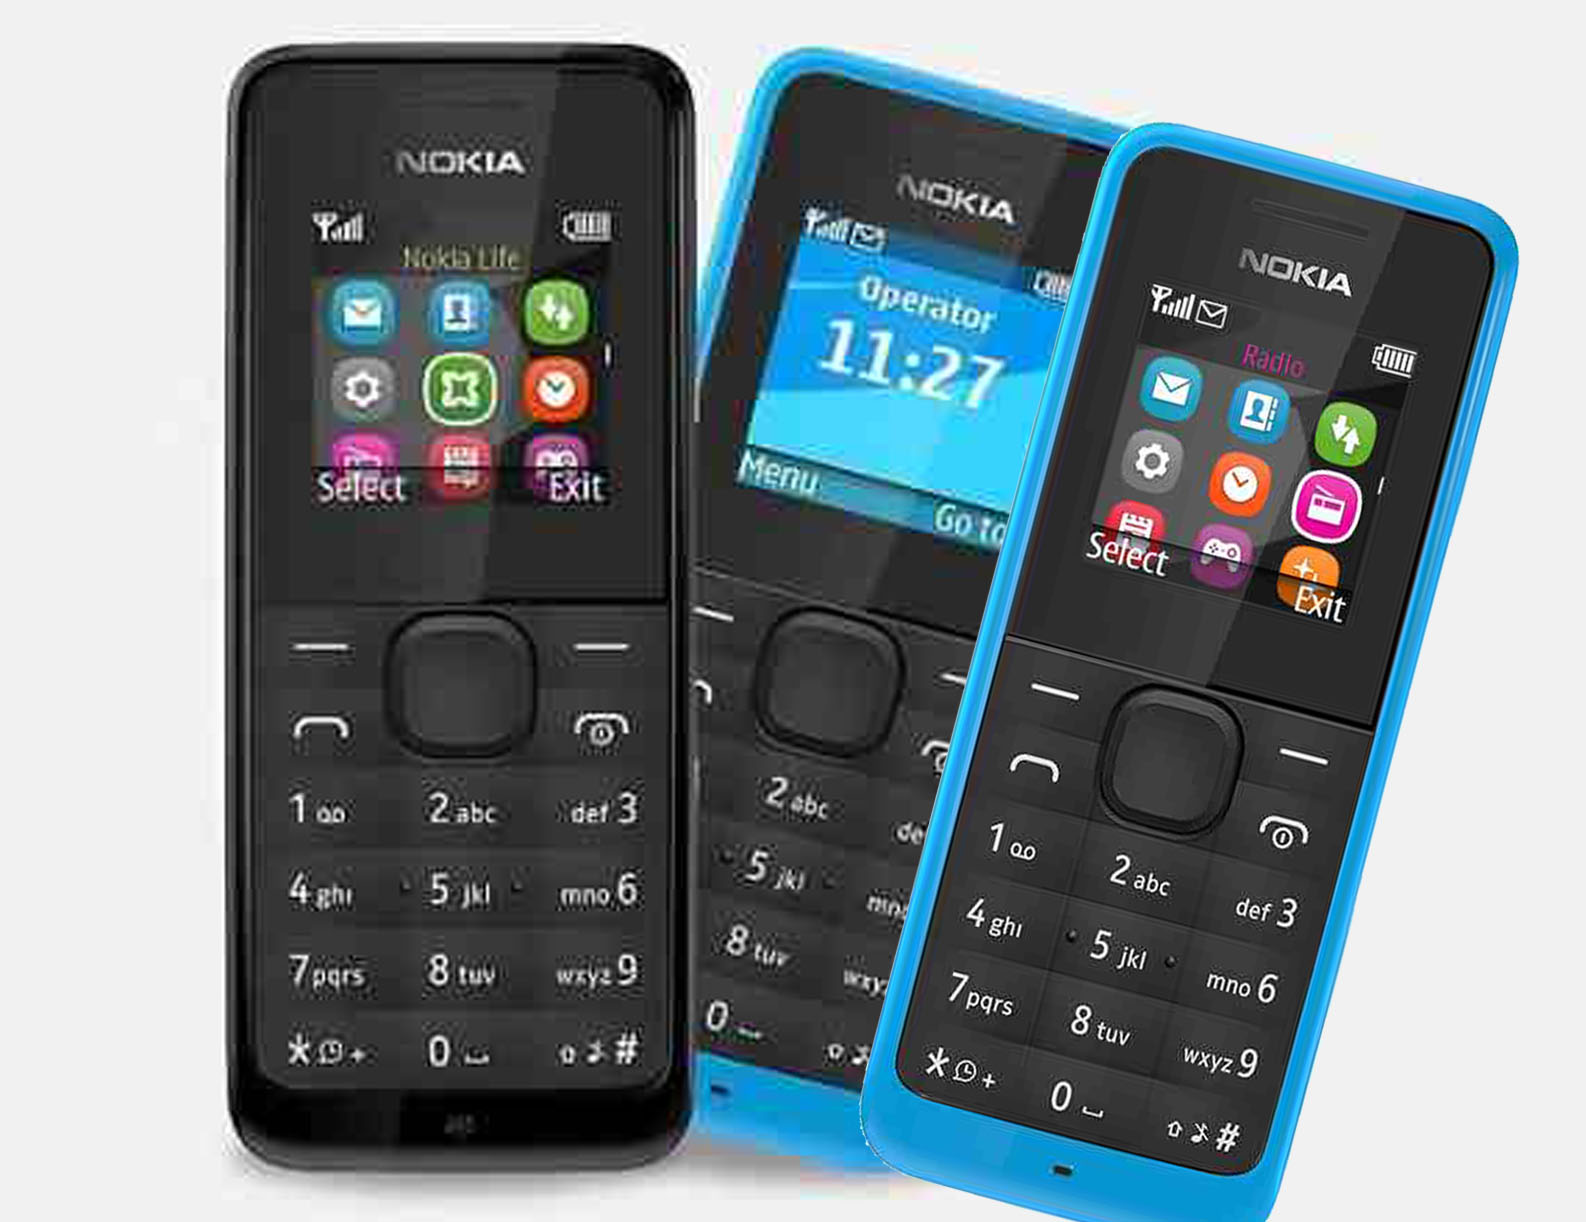 6. Unlock Nokia 105 Games without Code - wide 2